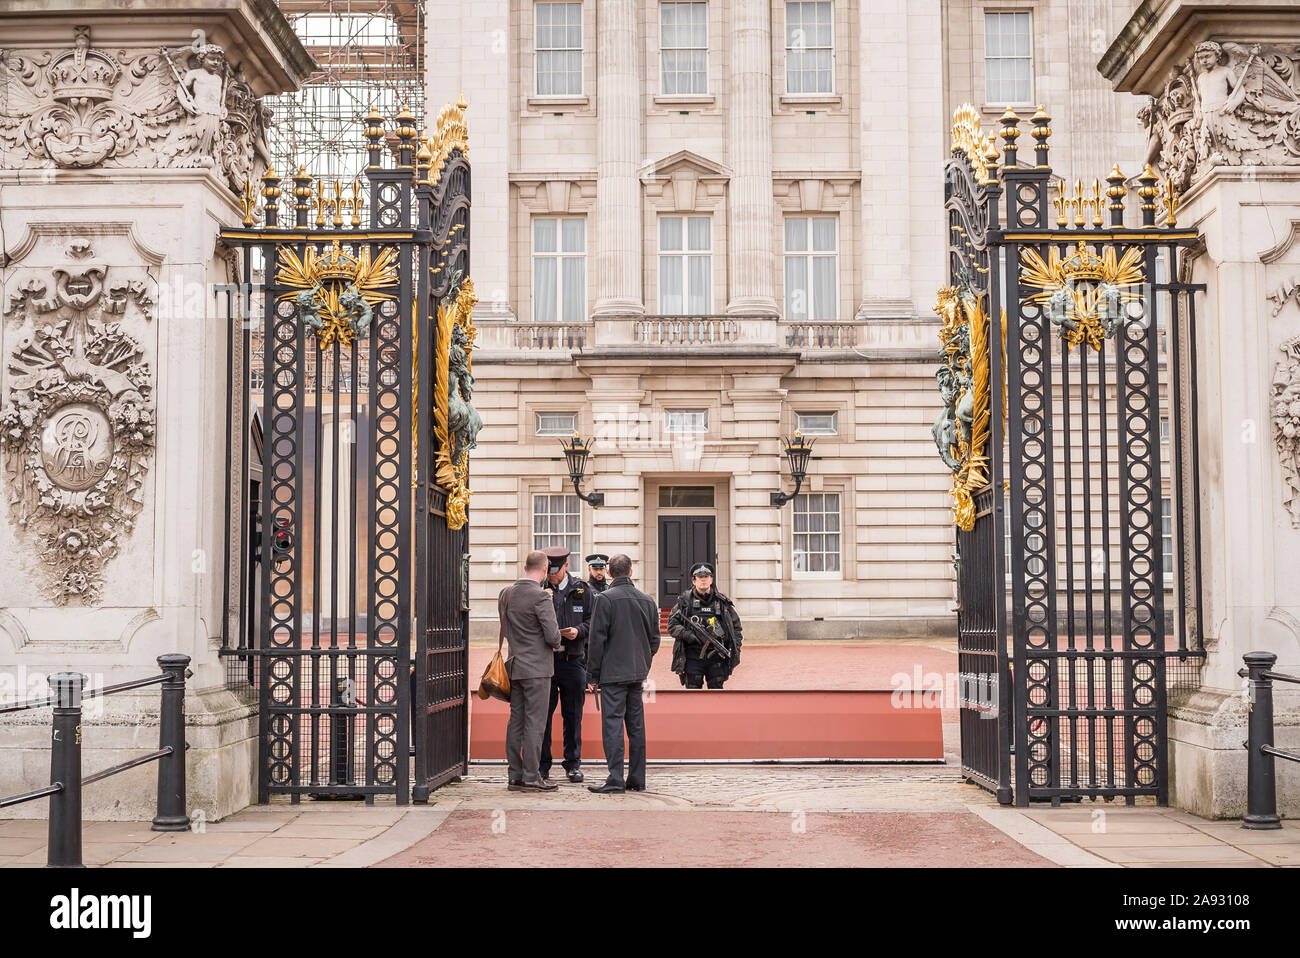 Looking through open front gates of Buckingham Palace, central London, UK. Armed police on guard checking security of visitors. Guarding royal family. Stock Photo